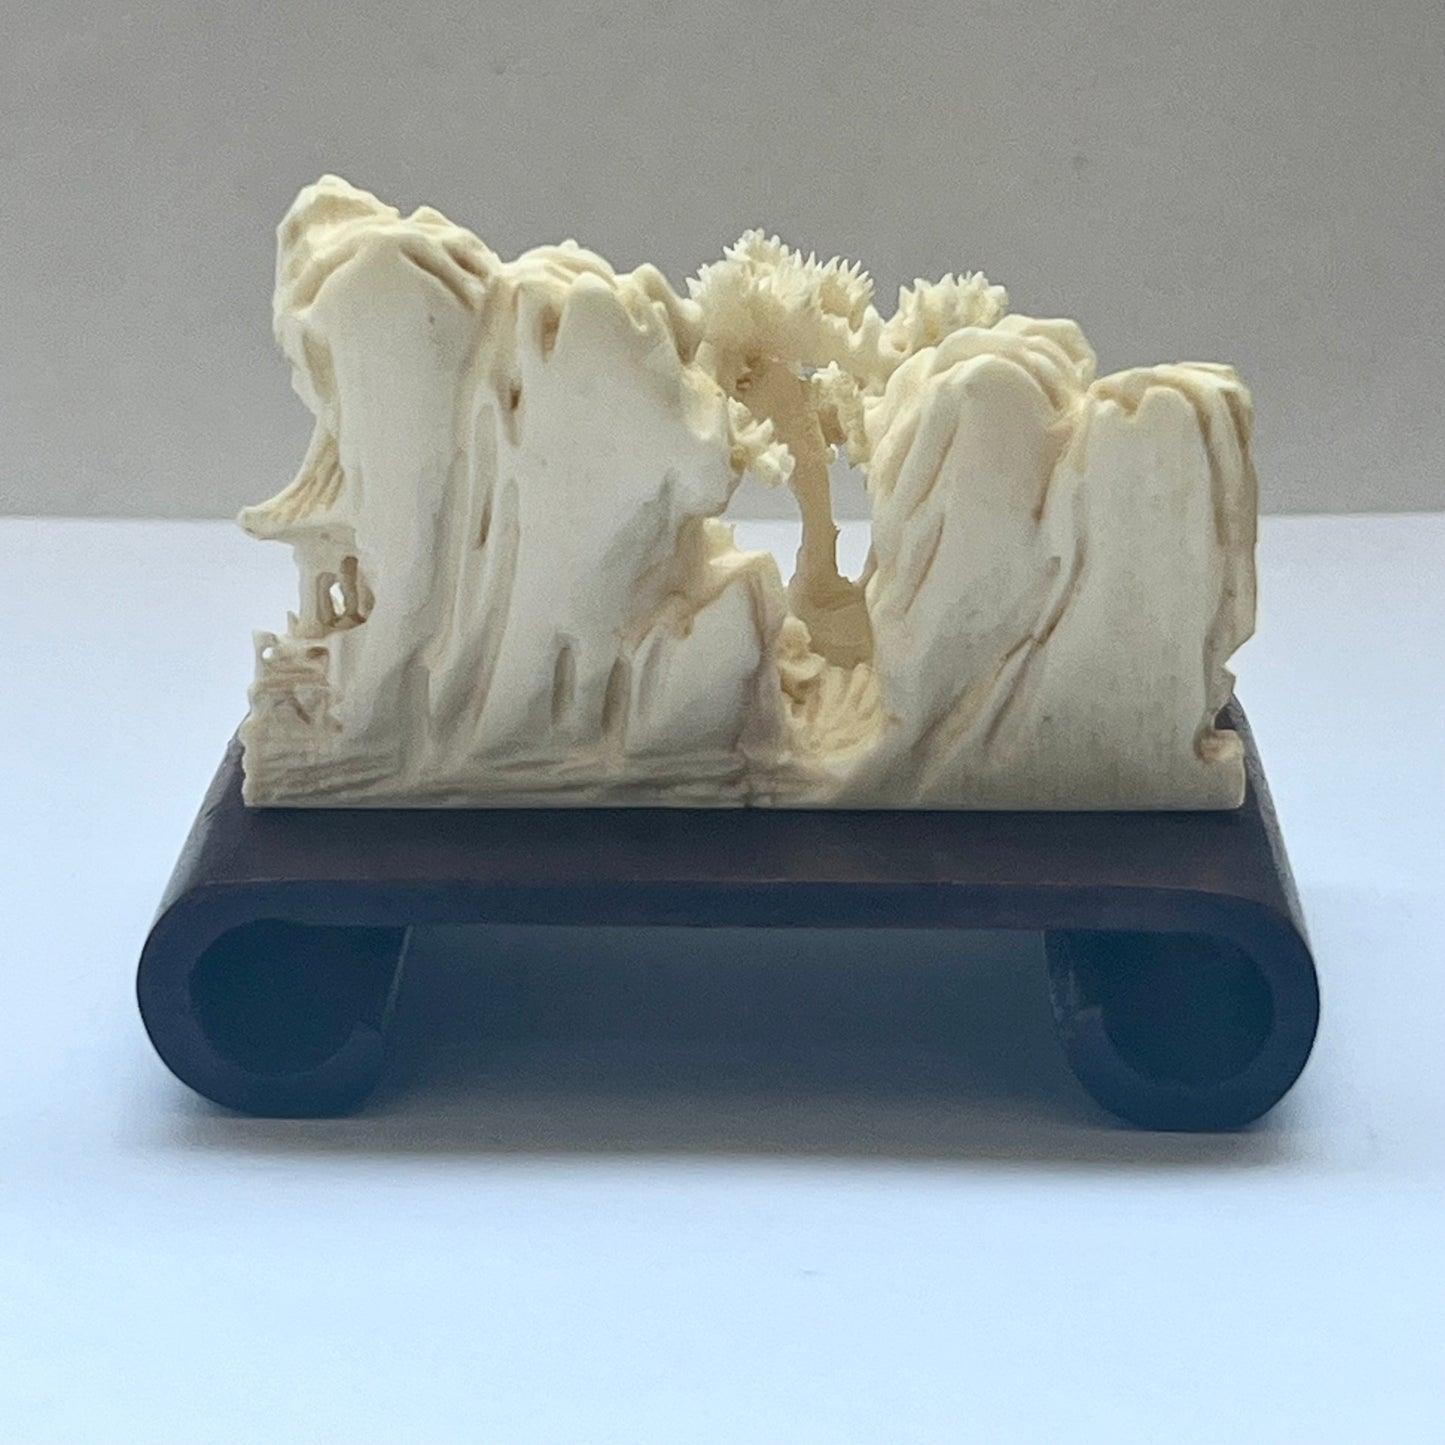 A rare and lovely early Japanese export trade ivory carving, Riverside Scene circa late 19th century